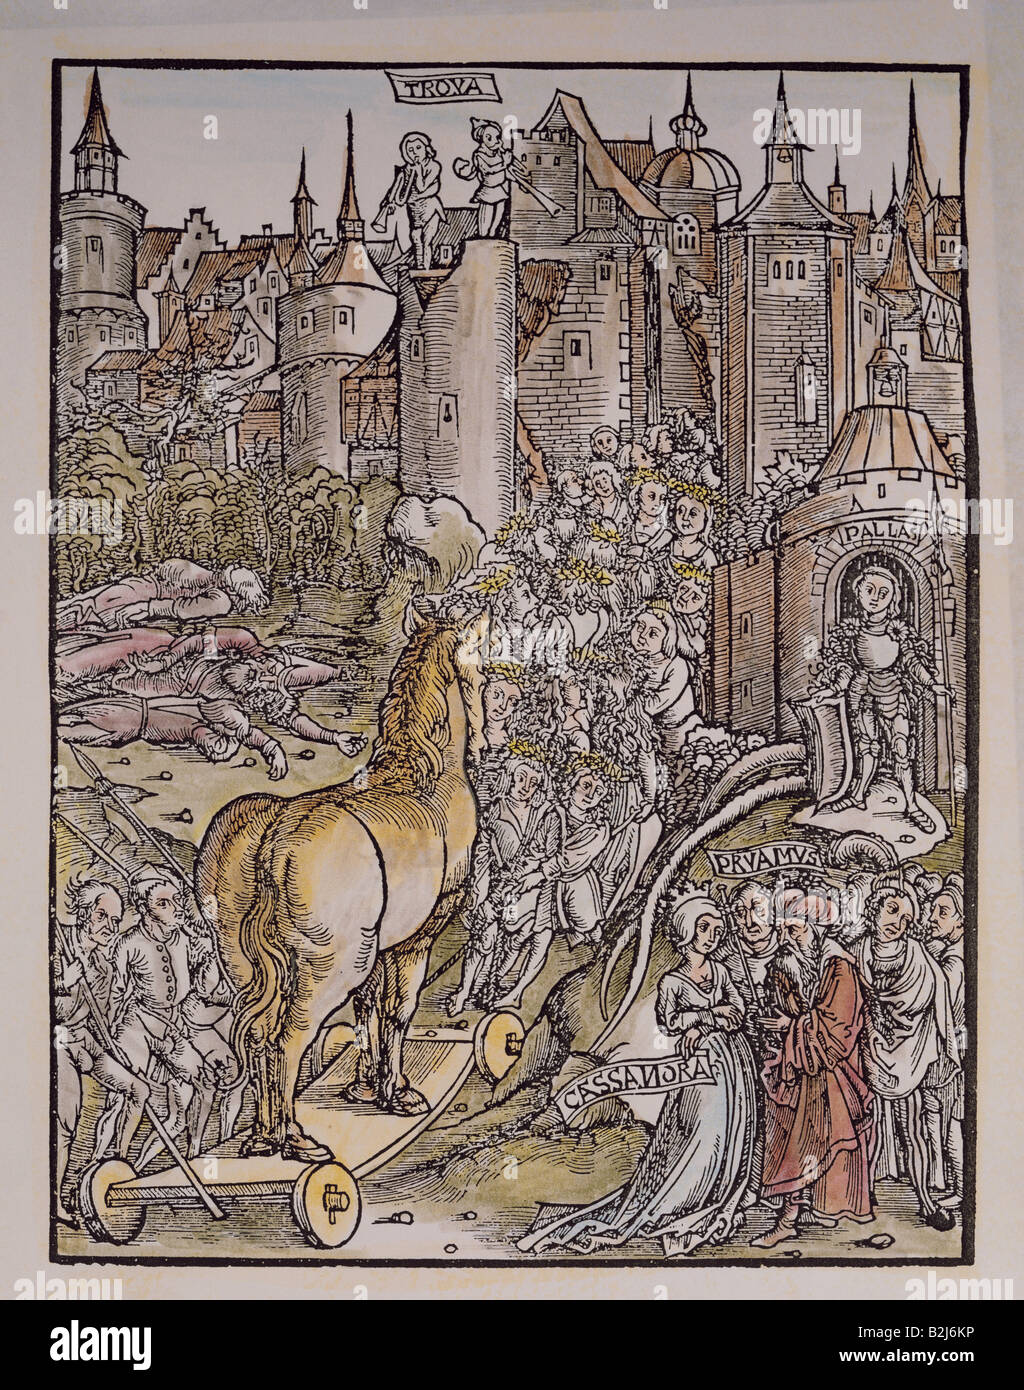 literature, Vergil, 'Aeneid', illustrations, coloured woodcut for the second volume, edition of 1502, Strasbourg, Germany, edited by Sebastian Brant (1457-1521), printed by Johannes Grueninger, private collection, Stock Photo